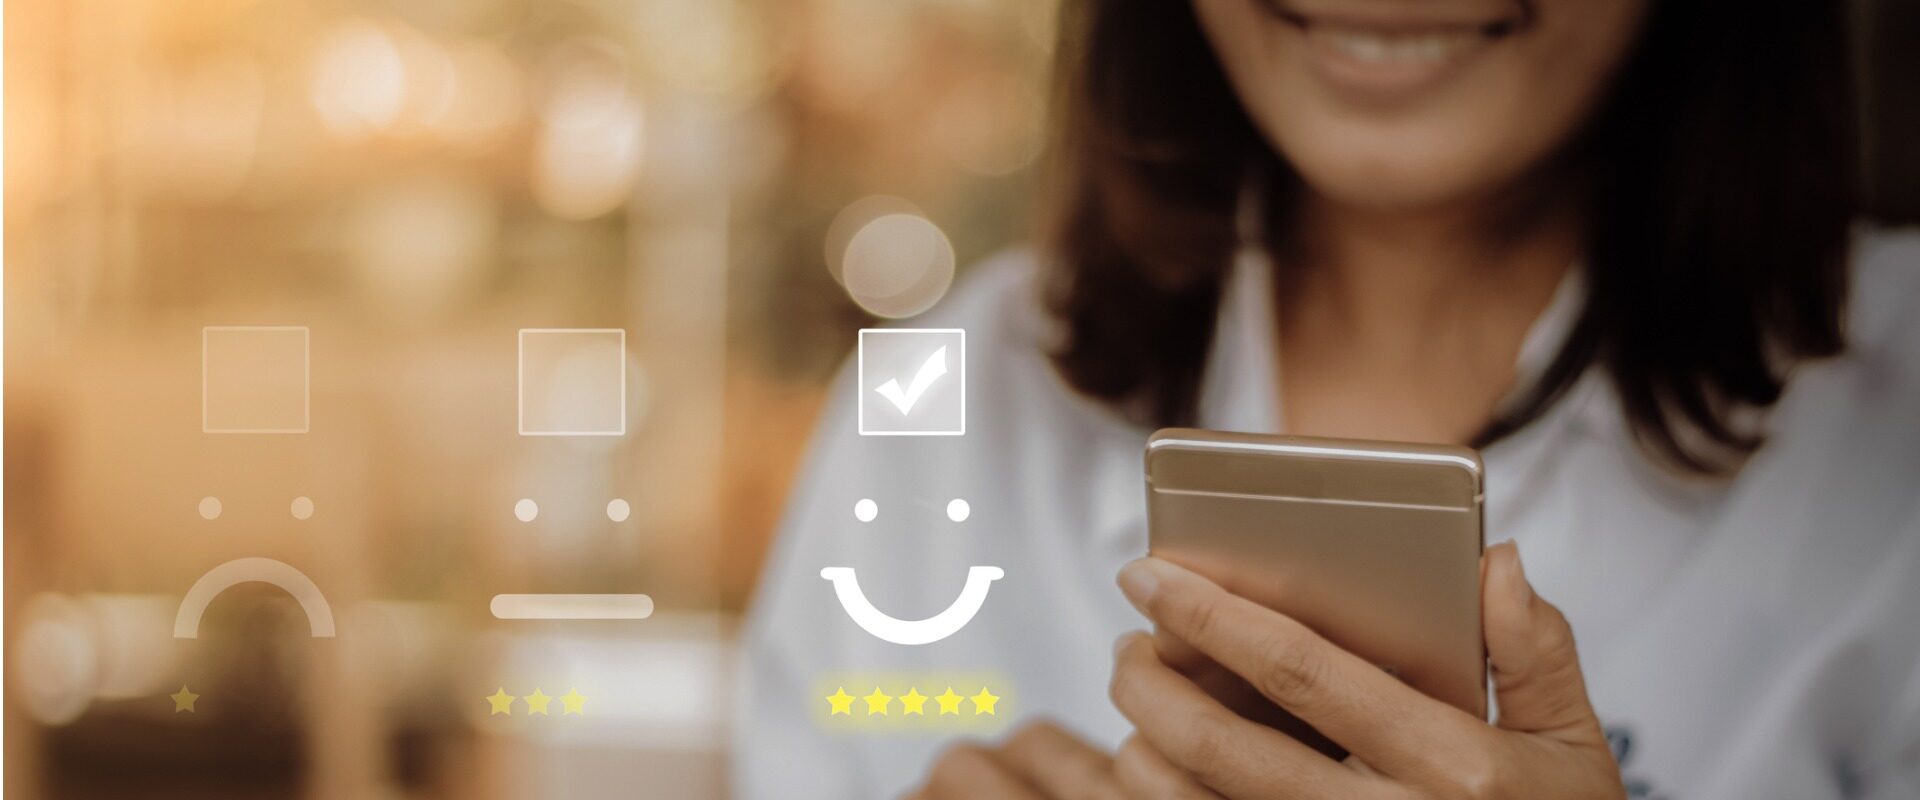 Smiling woman on smartphone with ratings and emojis superimposed over top of image